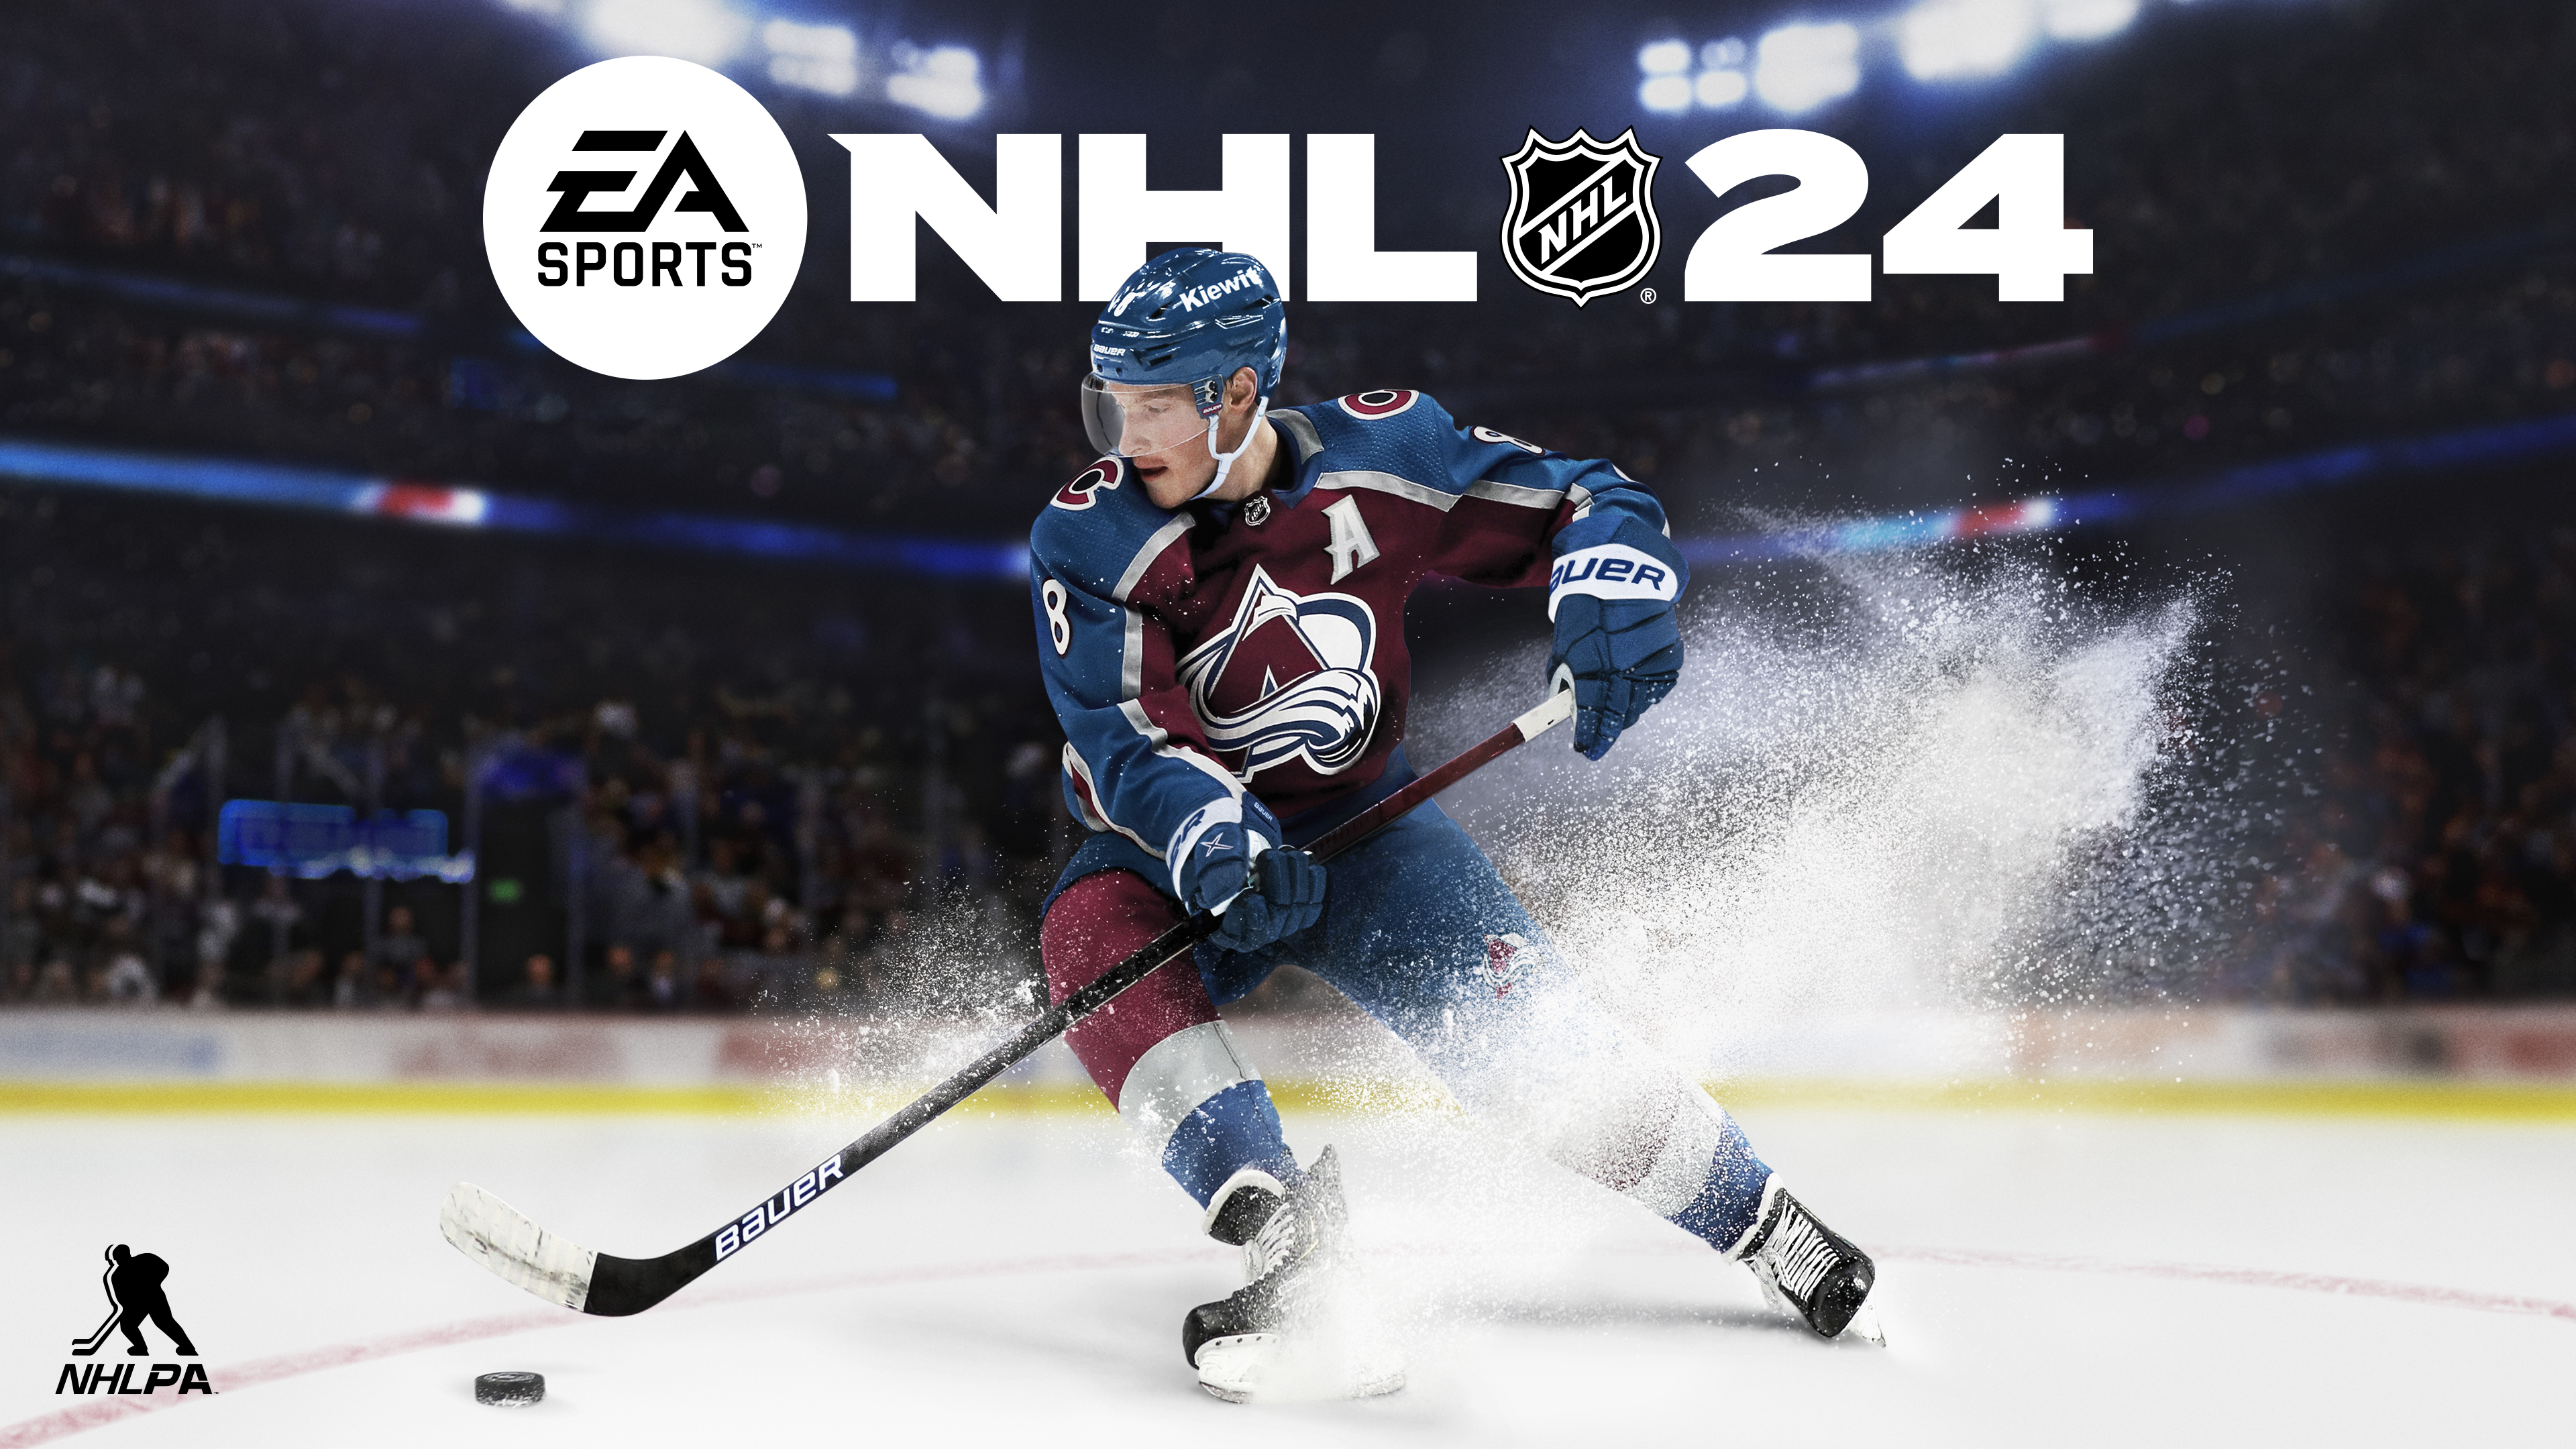 NHL 23 Builds: Best Forward Builds for World Of Chel and EASHL